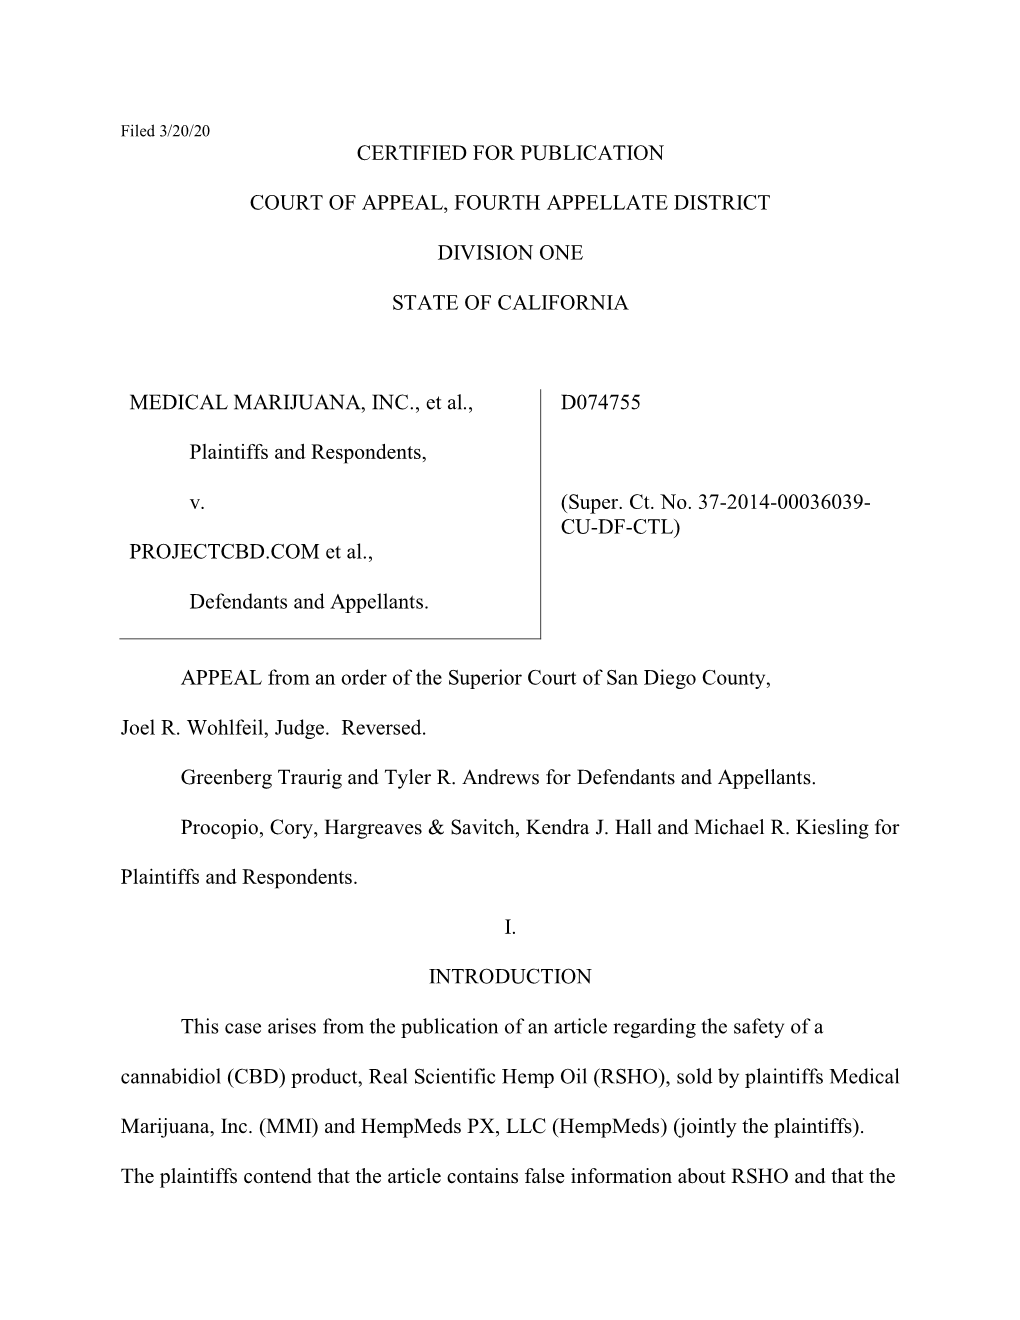 CERTIFIED for PUBLICATION COURT of APPEAL, FOURTH APPELLATE DISTRICT DIVISION ONE STATE of CALIFORNIA MEDICAL MARIJUANA, INC., E